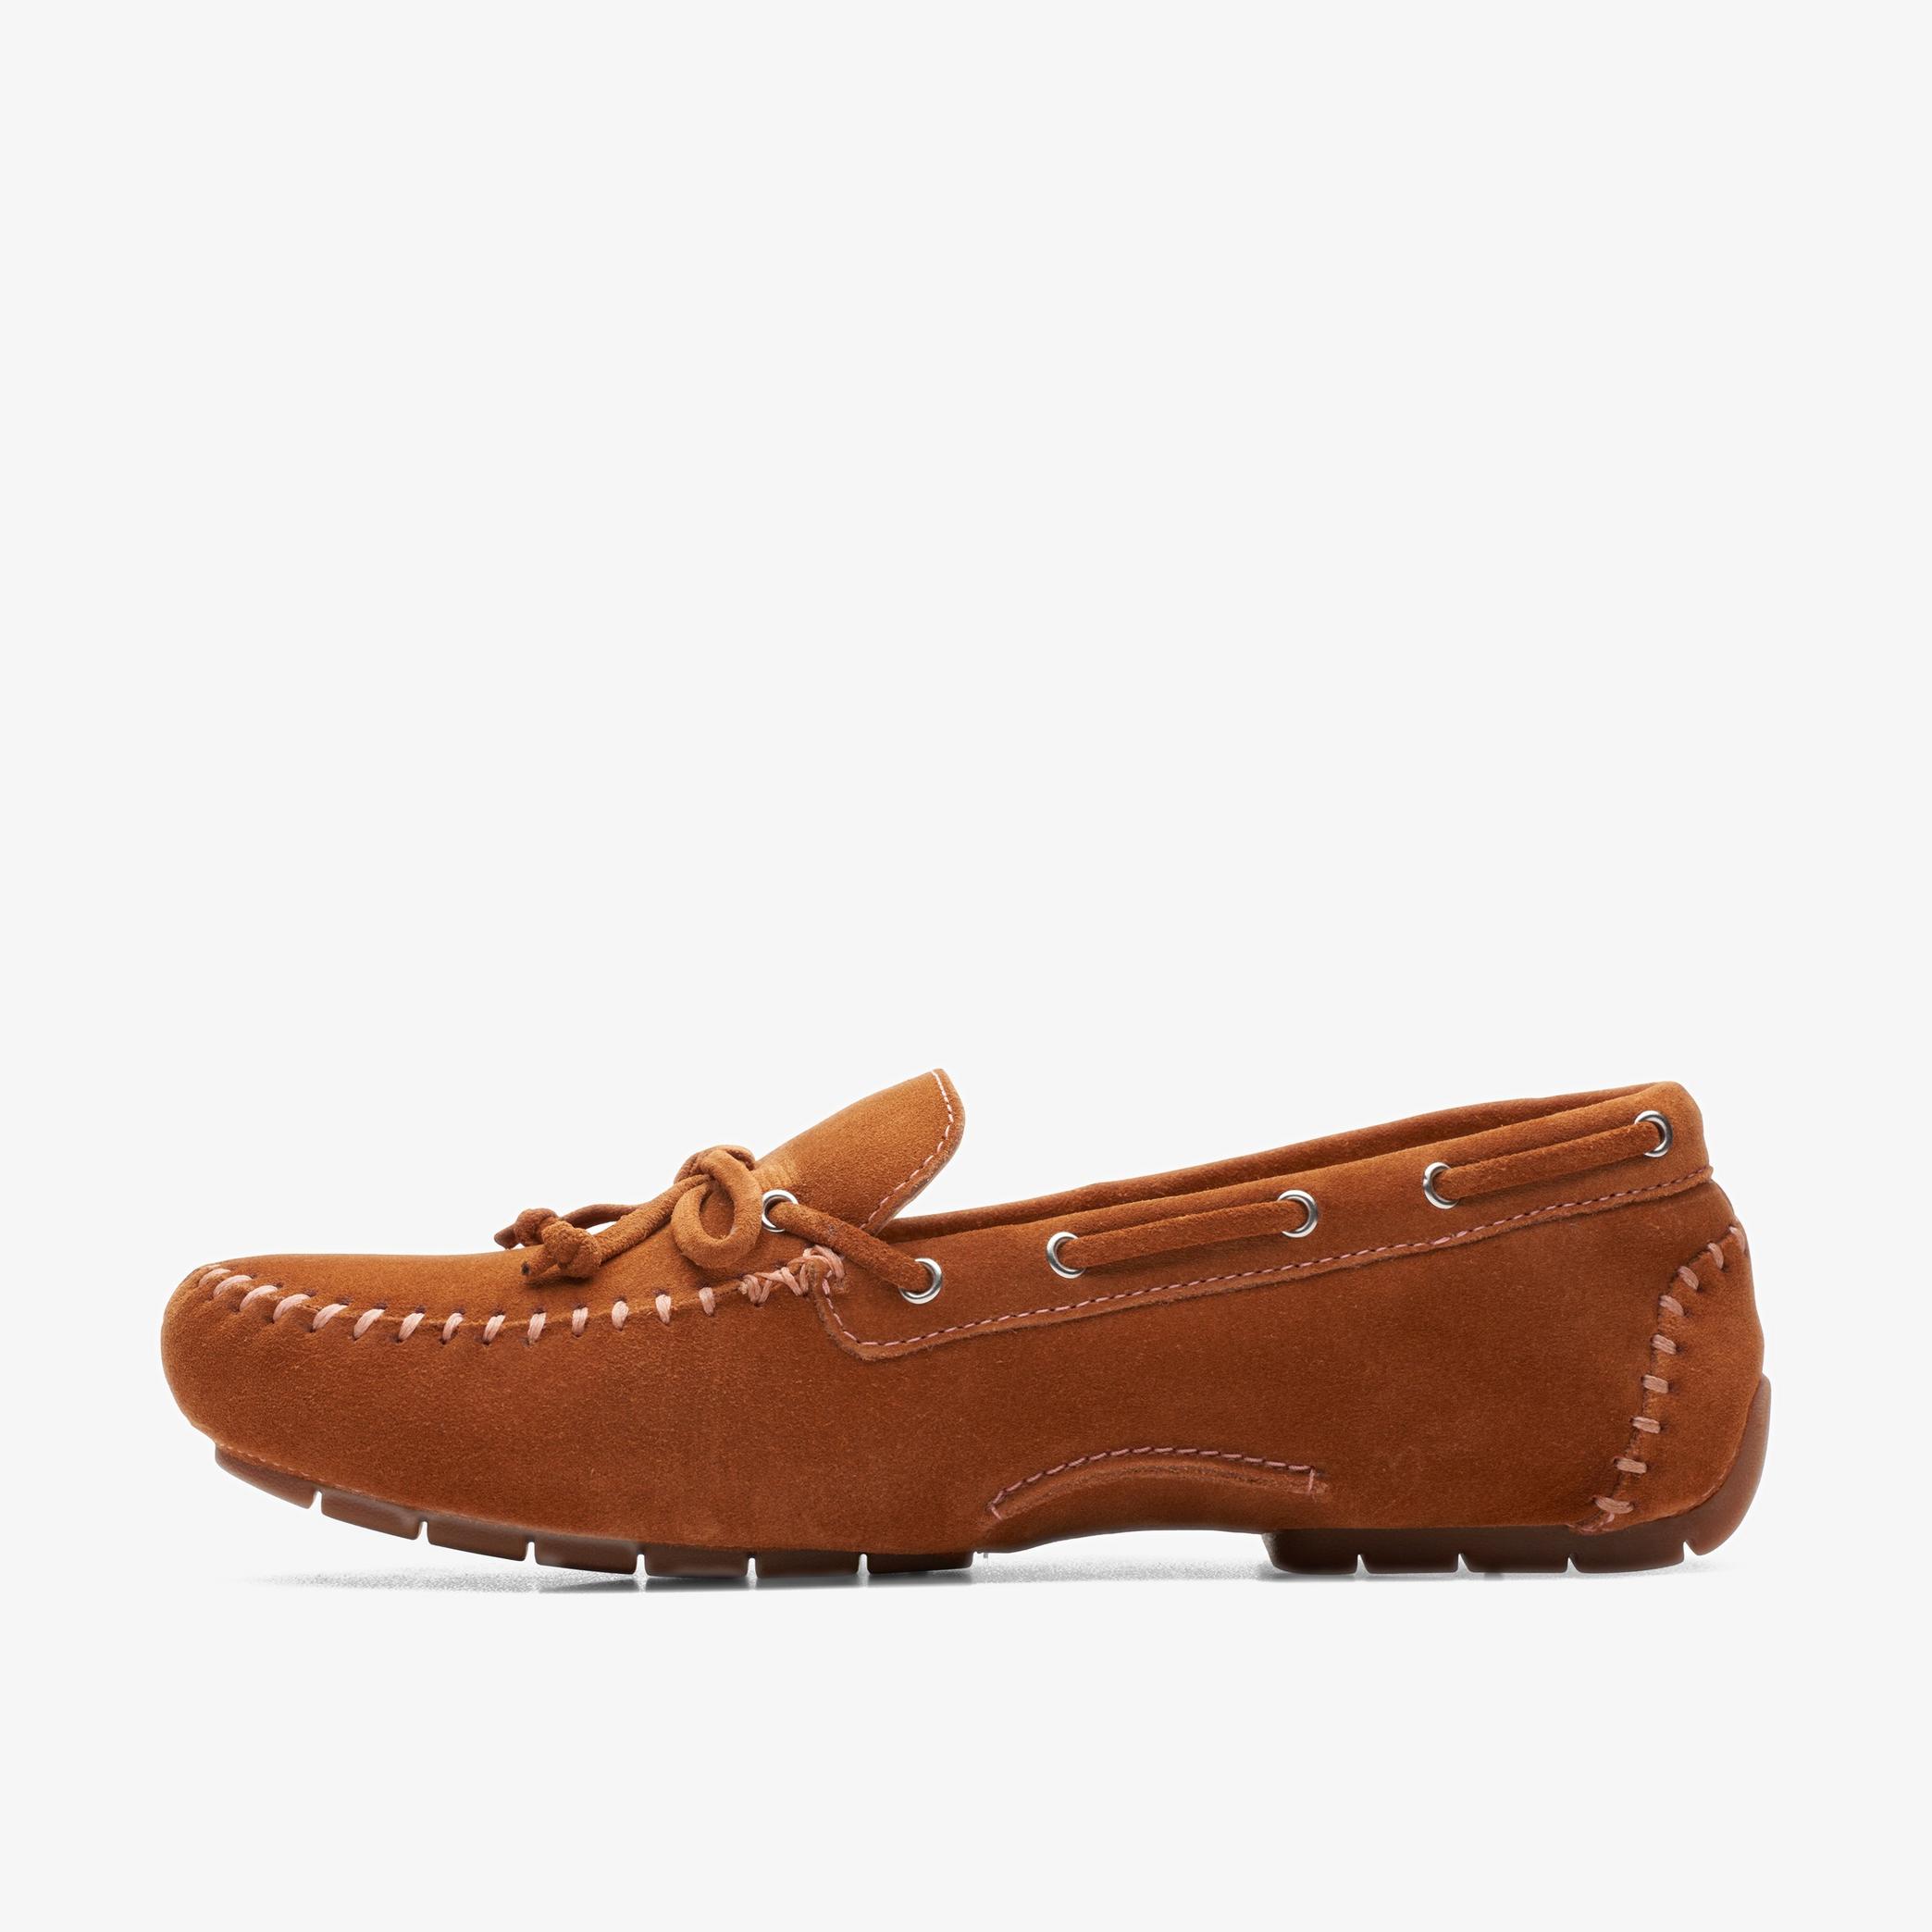 C Mocc Tie Tan Suede Loafers, view 2 of 6